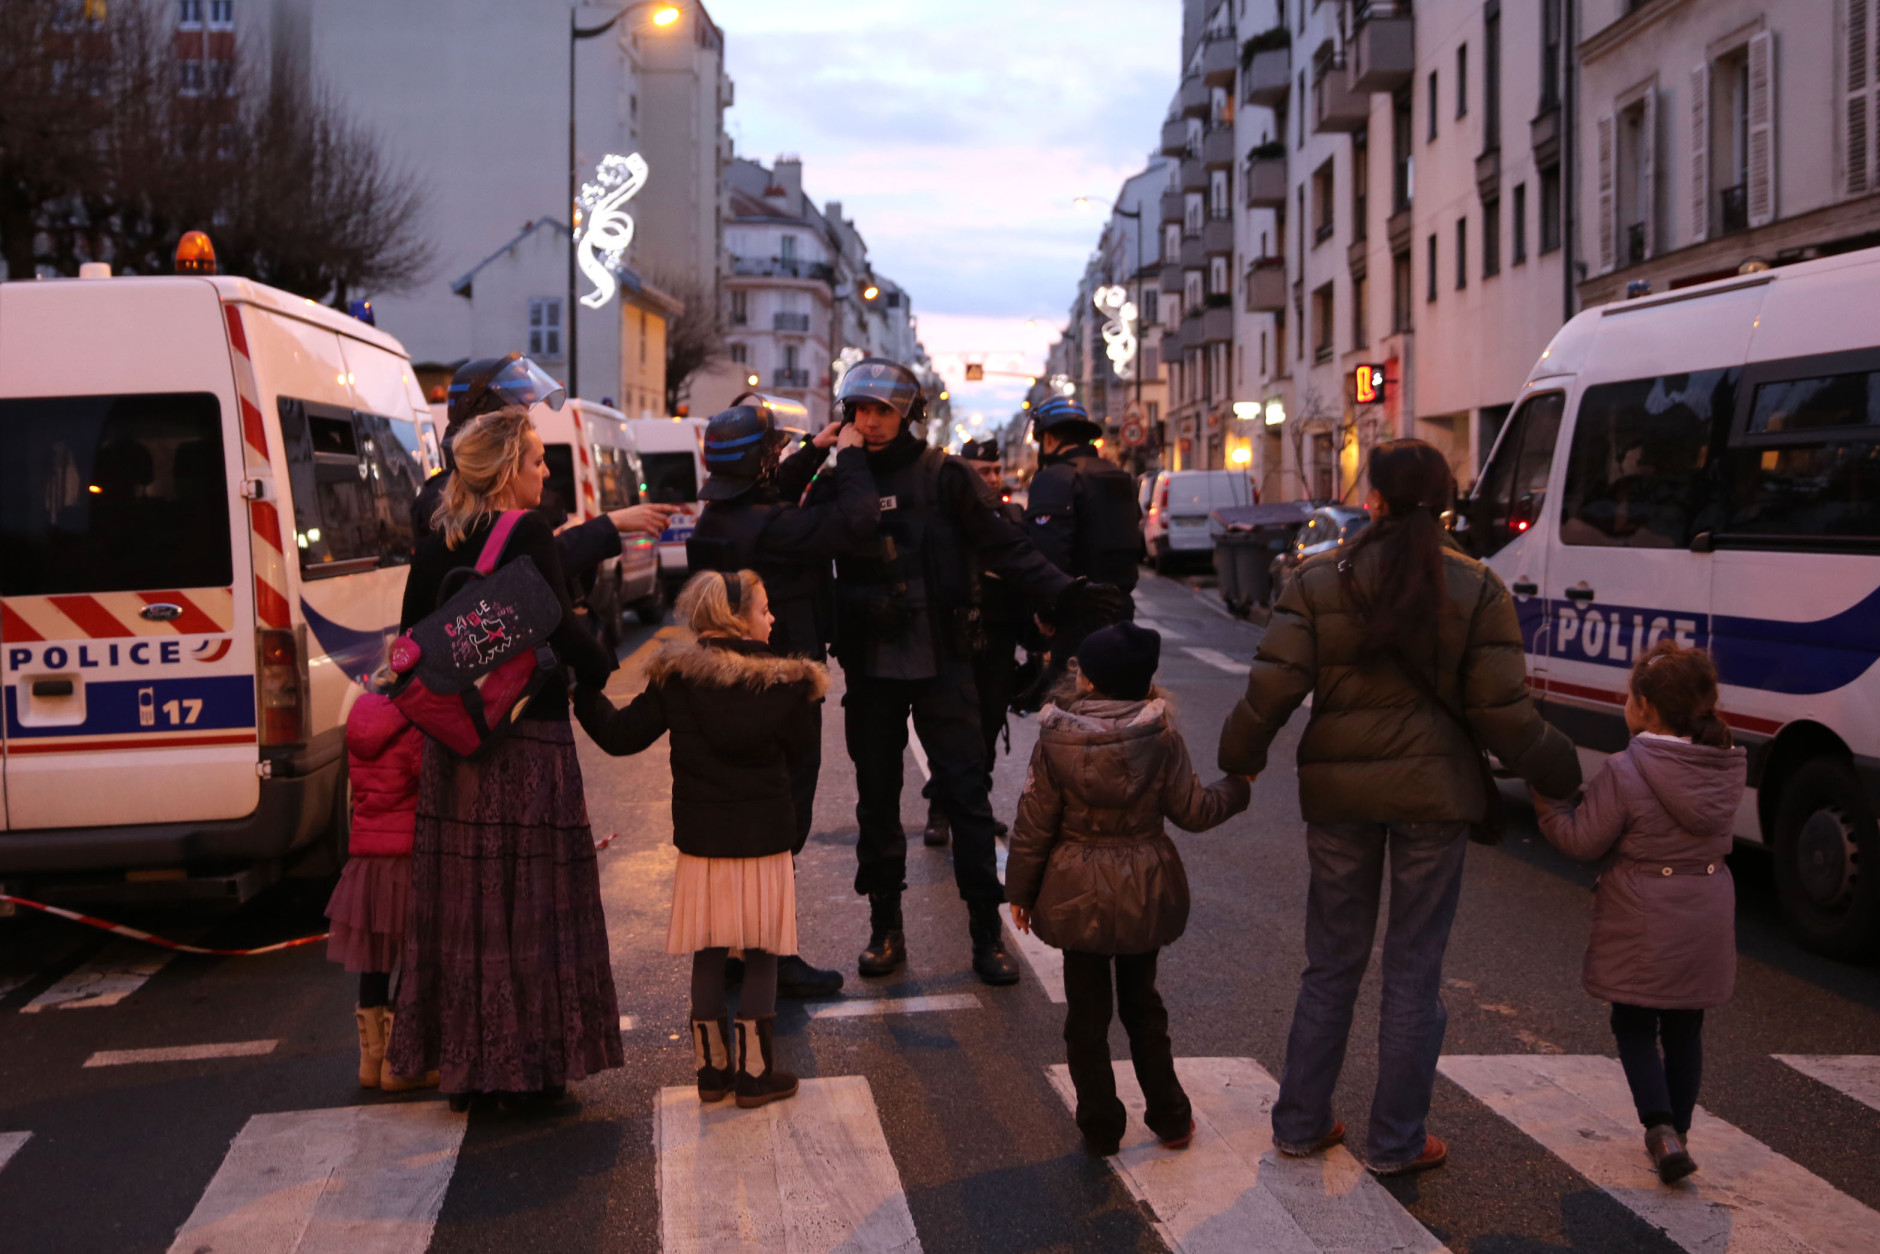  Police escort women and children as they mobilize at the hostage situation at Port de Vincennes on January 9, 2015 in Paris, France. According to reports at least five people have been taken hostage in a kosher deli in the Port de Vincennes area of Paris. A huge manhunt for the two suspected gunmen in Wednesday's deadly attack on Charlie Hebdo magazine has entered its third day. (Photo by Dan Kitwood/Getty Images)